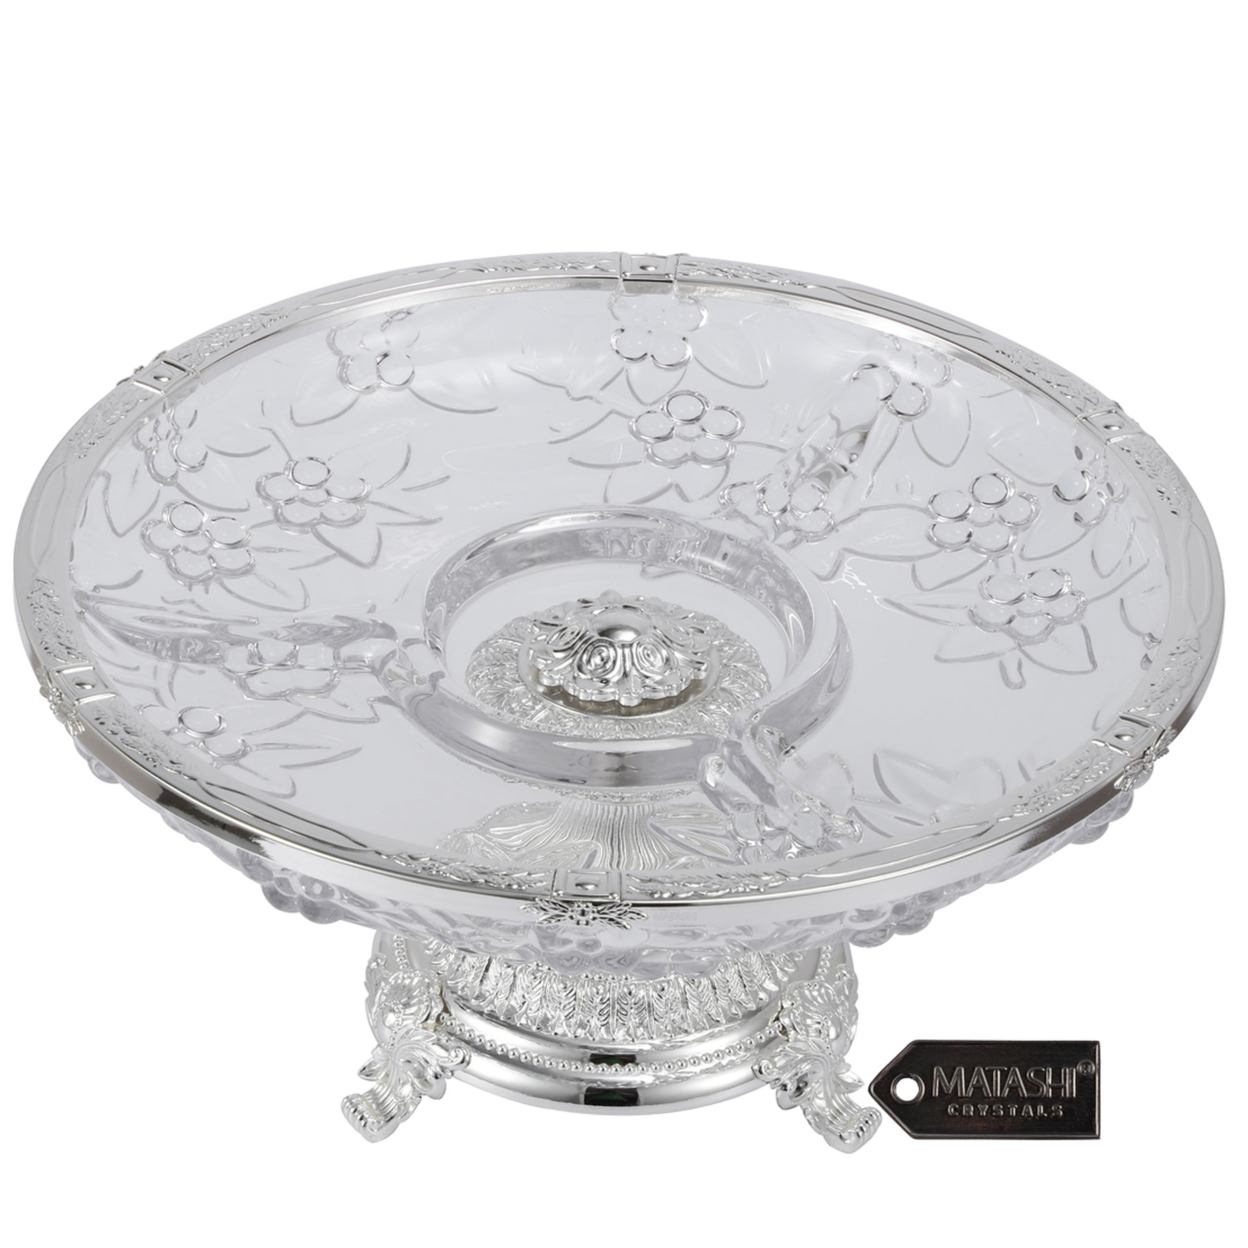 Matashi 3 Sectional Compote Centerpiece Decorative Bowl Round Serving Platter W Silver Plated Pedestal Base Tabletop For Weddings Parties